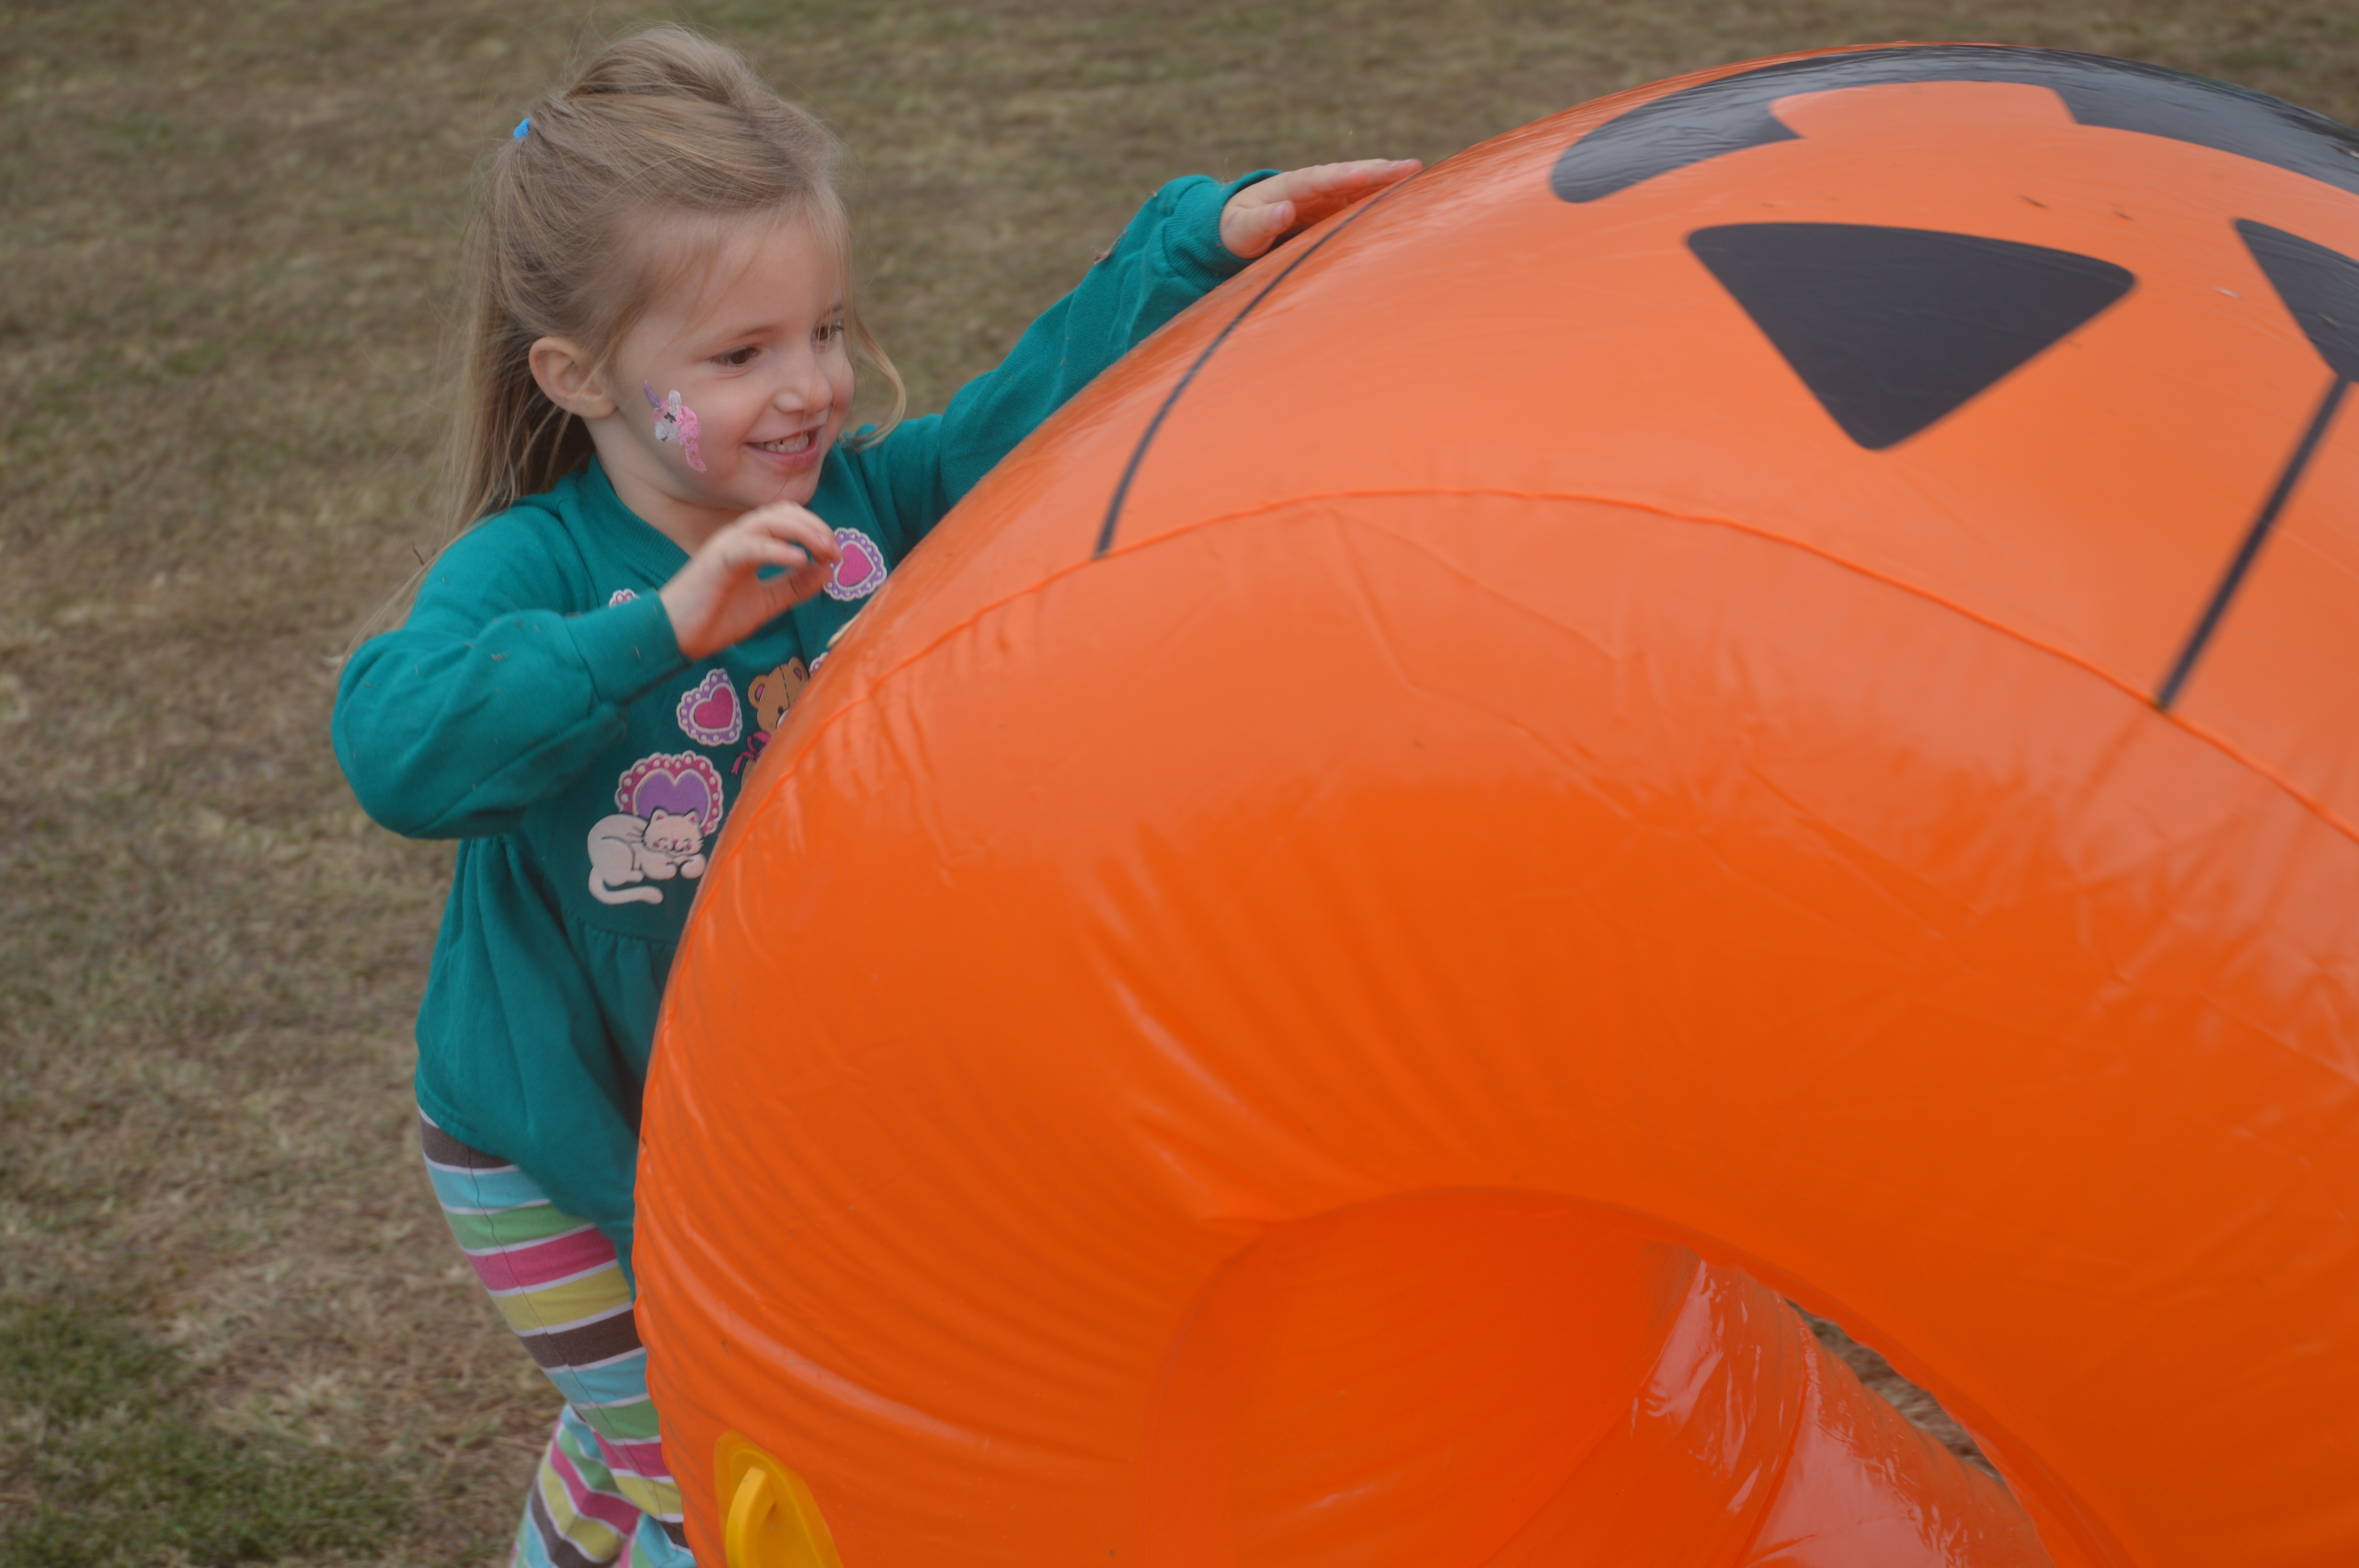 (Lorrie Ross • Clay County Progress) Four year old Harley Mott had a great time rolling an inflatable pumpkin across the kids' area.